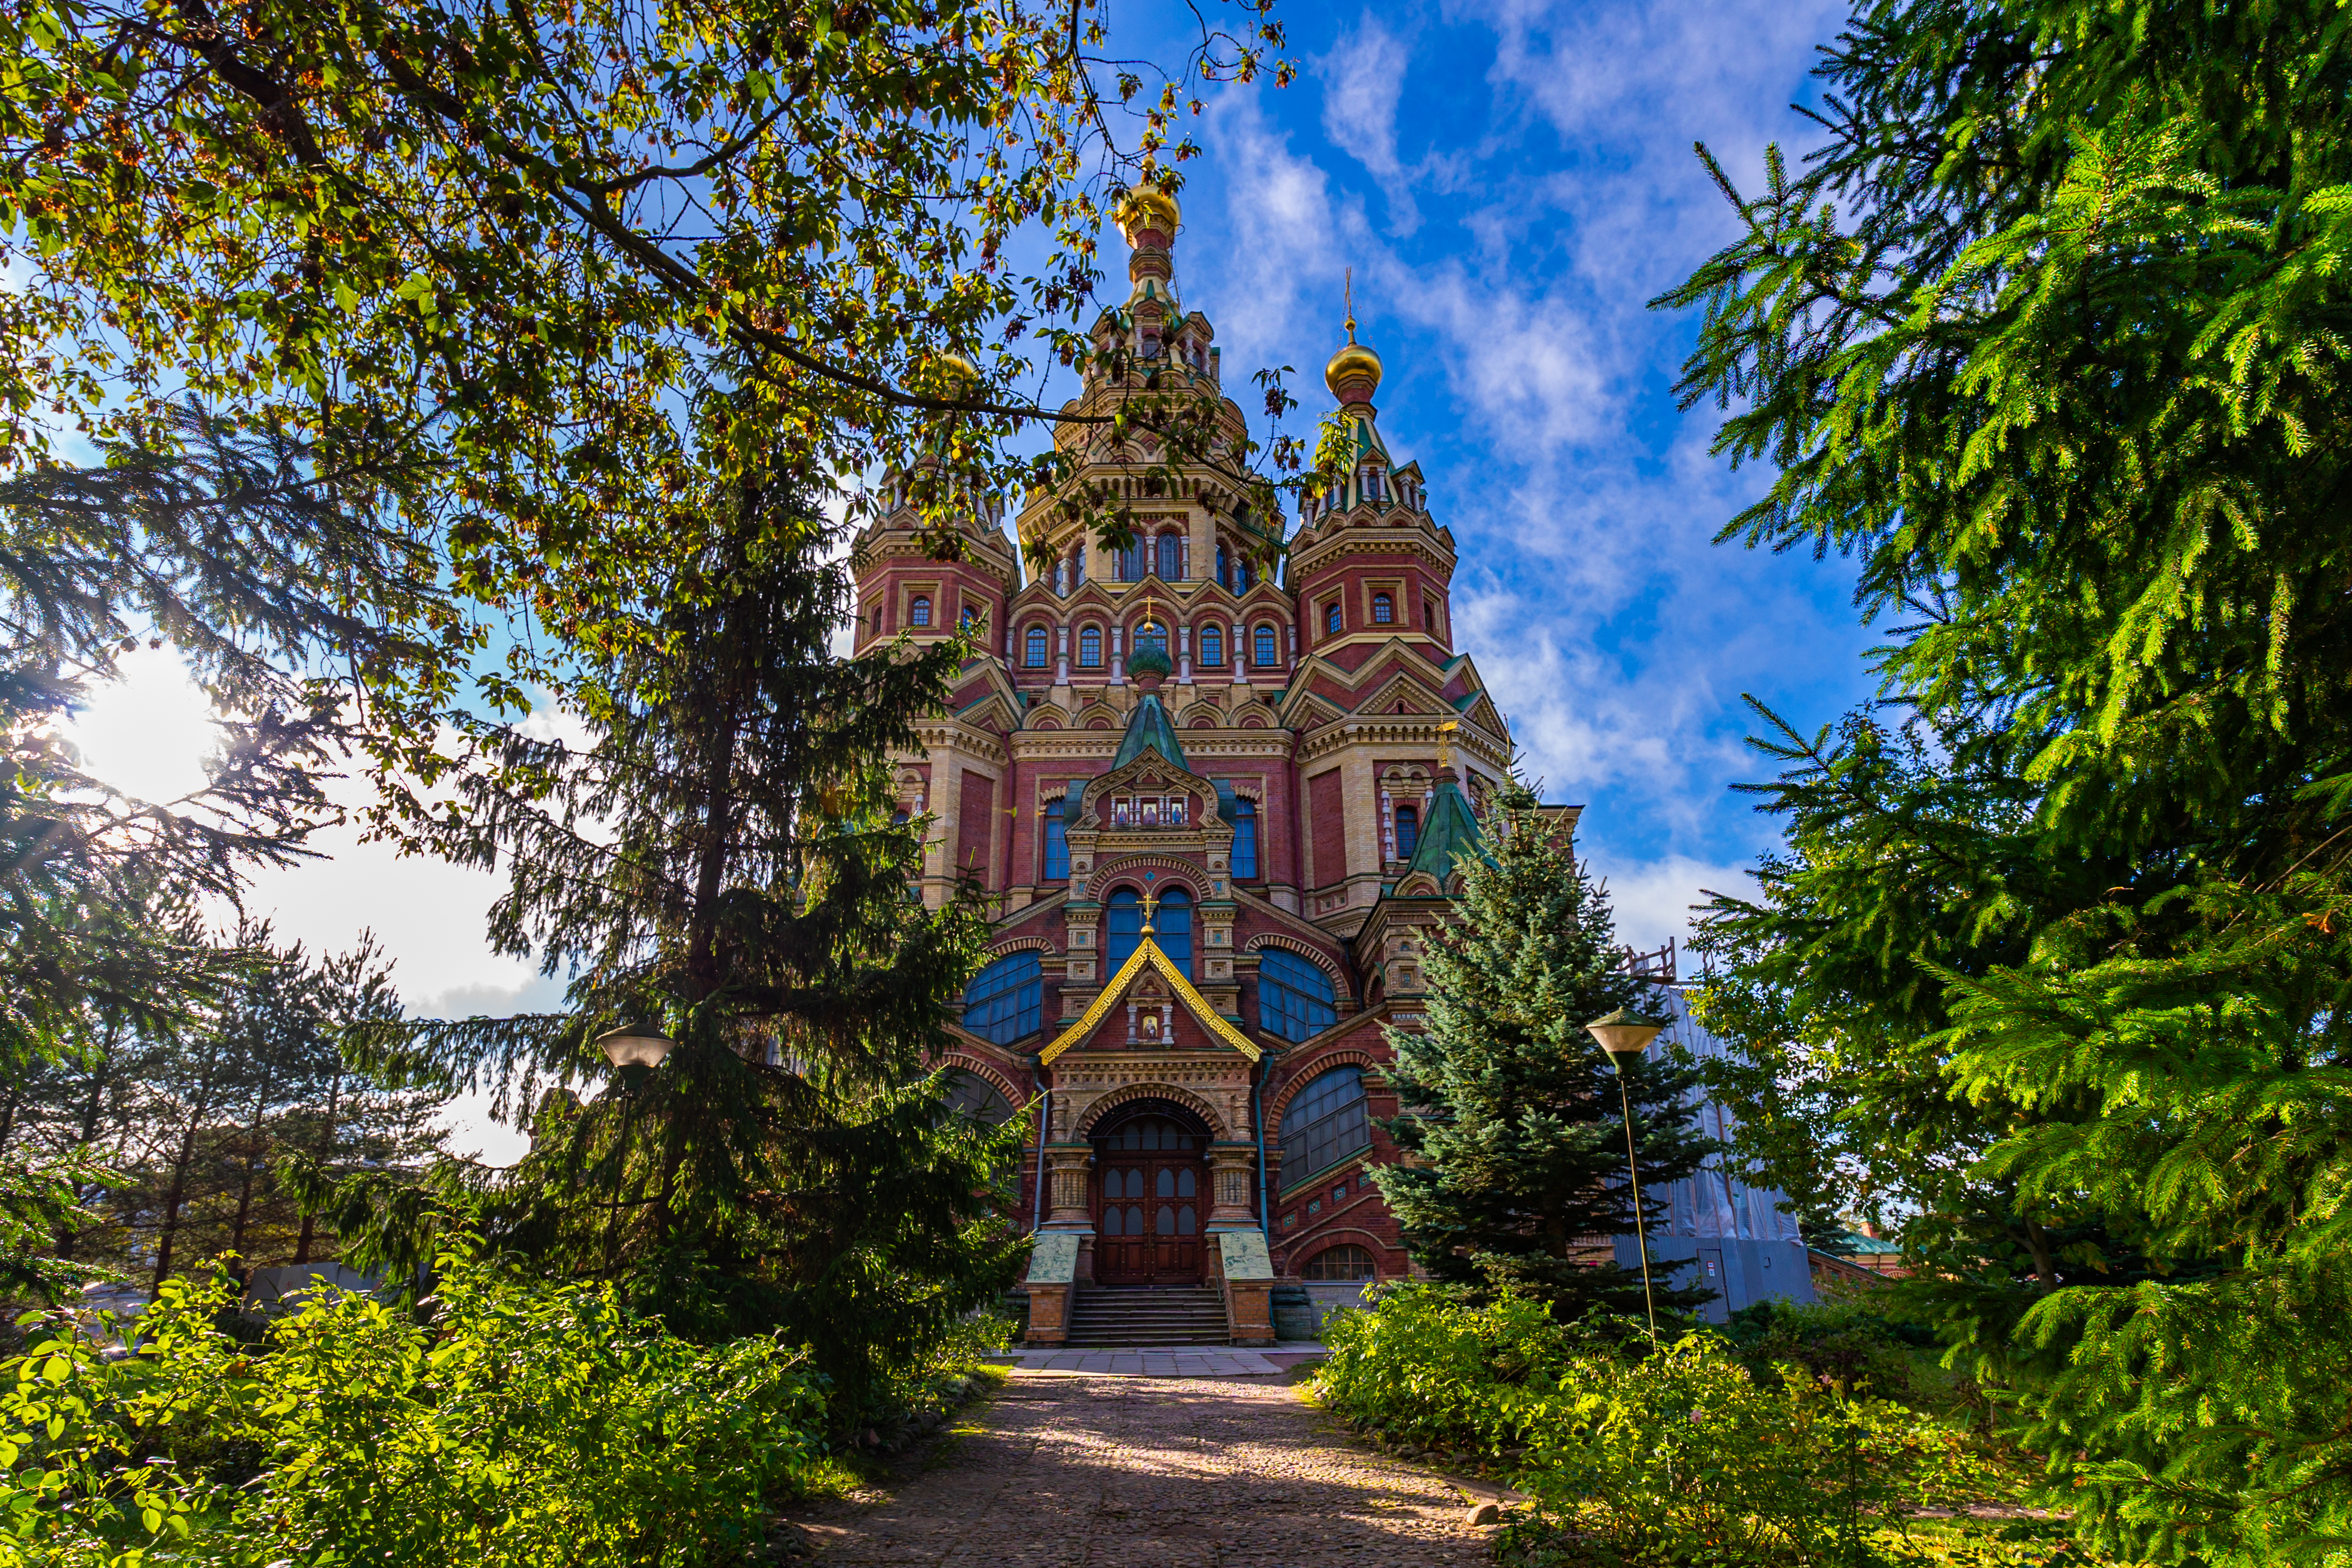 Peter and Paul Cathedral (Peterhof)